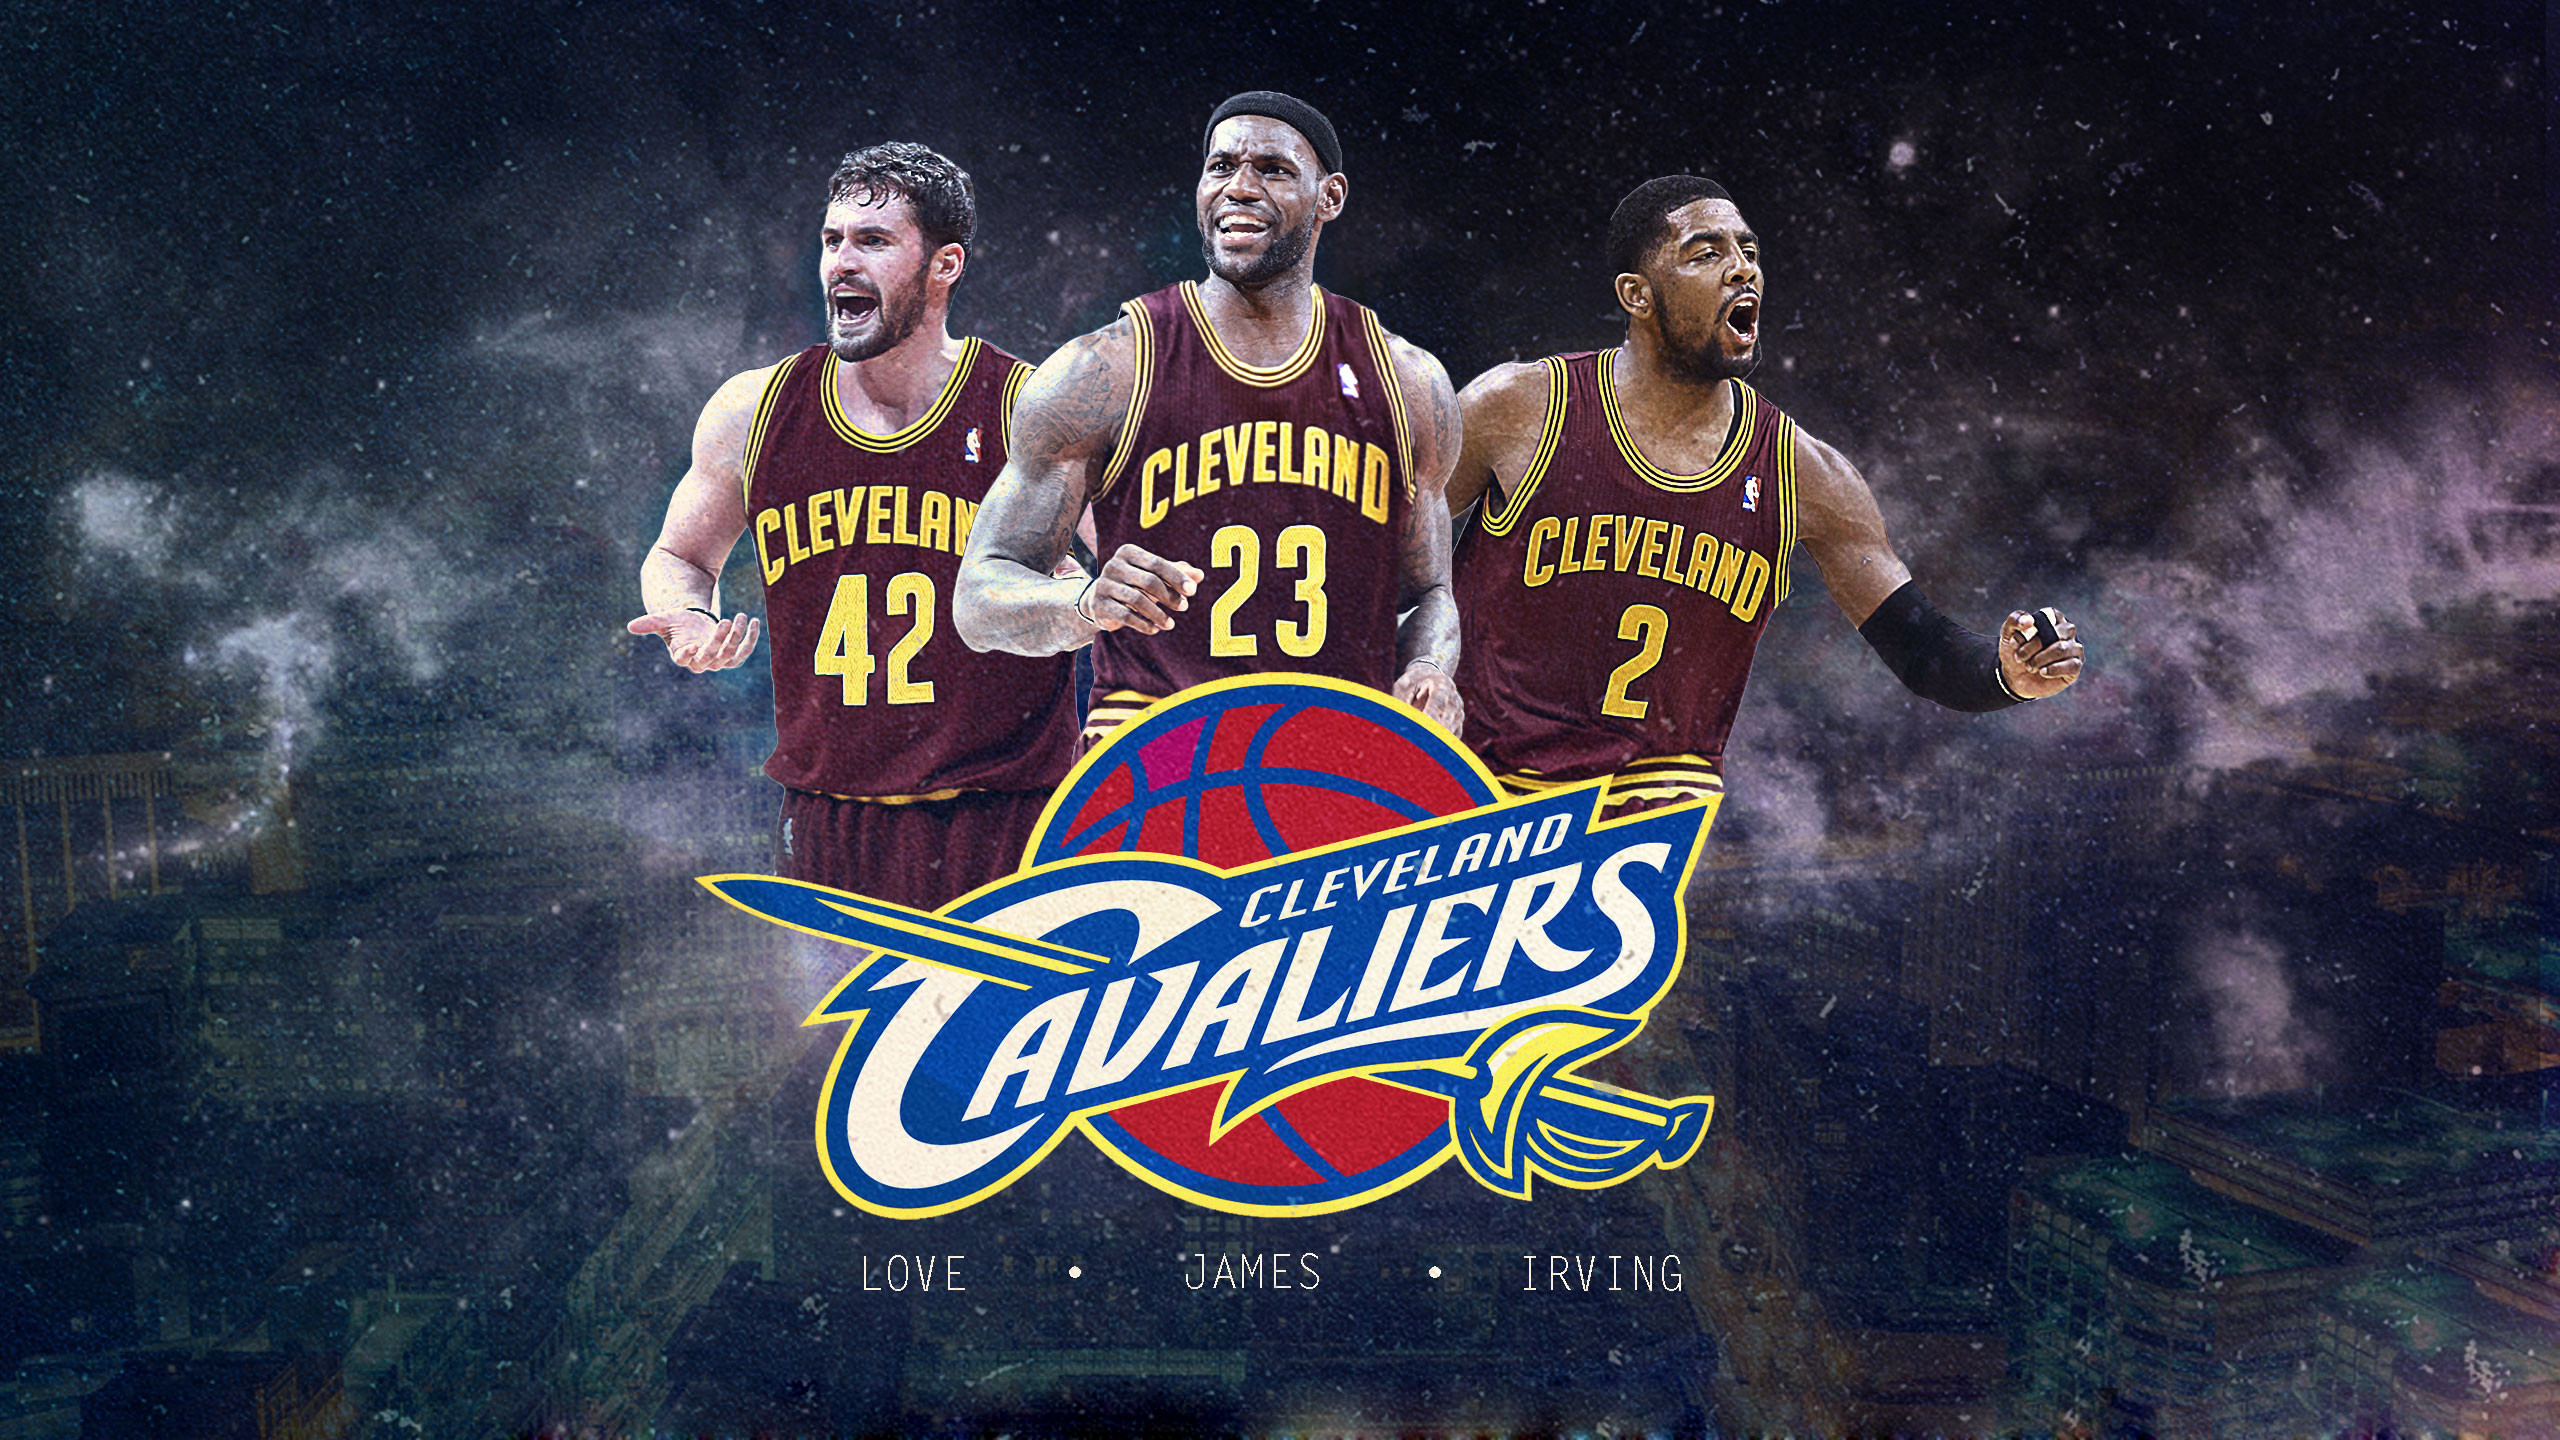 2560x1440 Love James Irving Cavaliers HD Wallpapers.